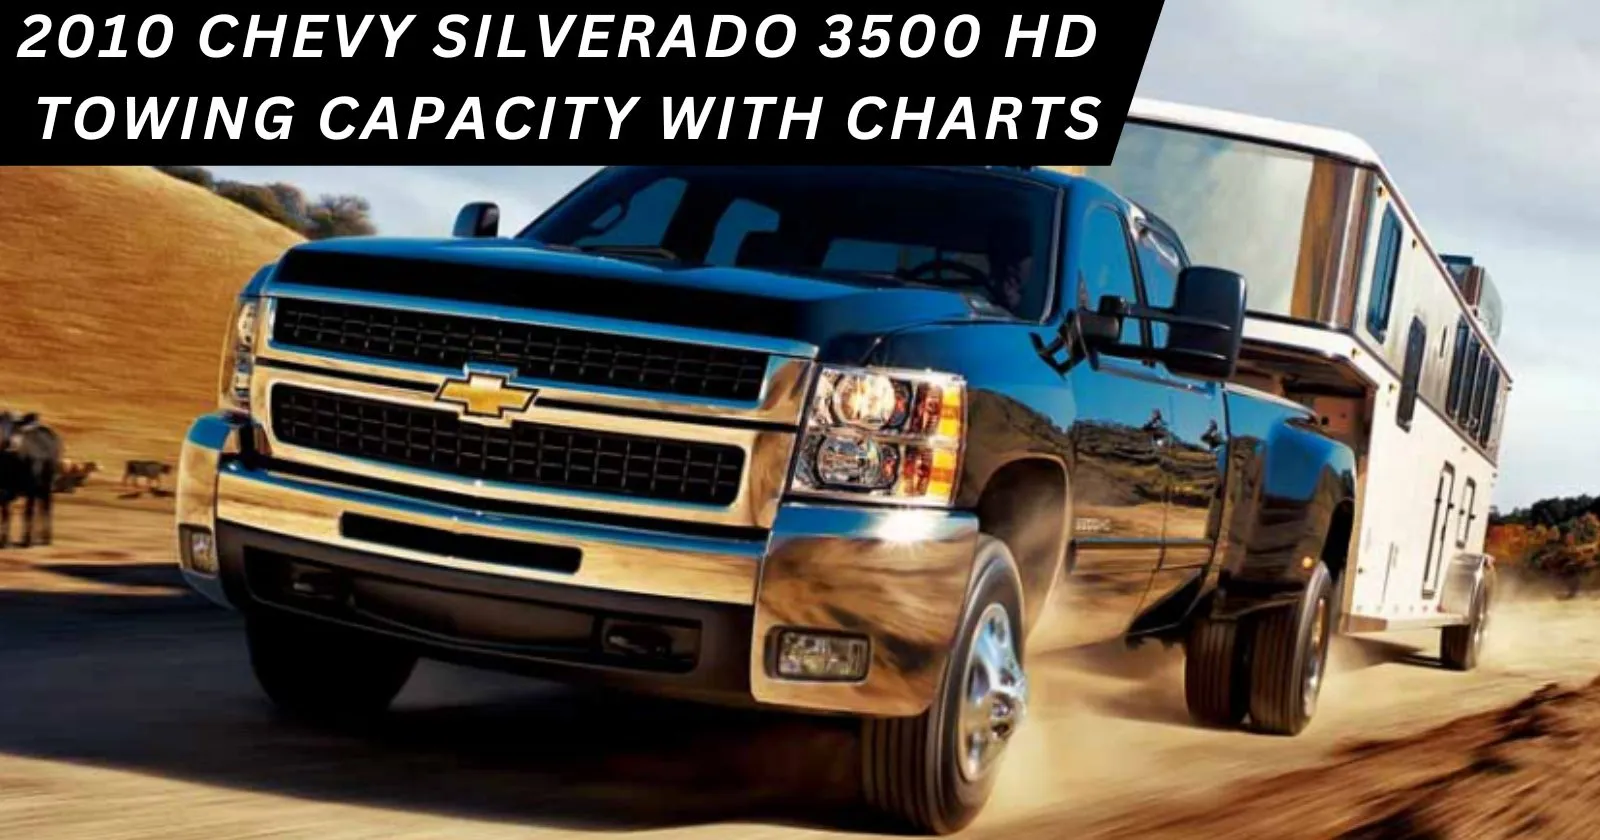 What is the 2010 Chevy Silverado 3500 HD Towing Capacity? Is it still capable?